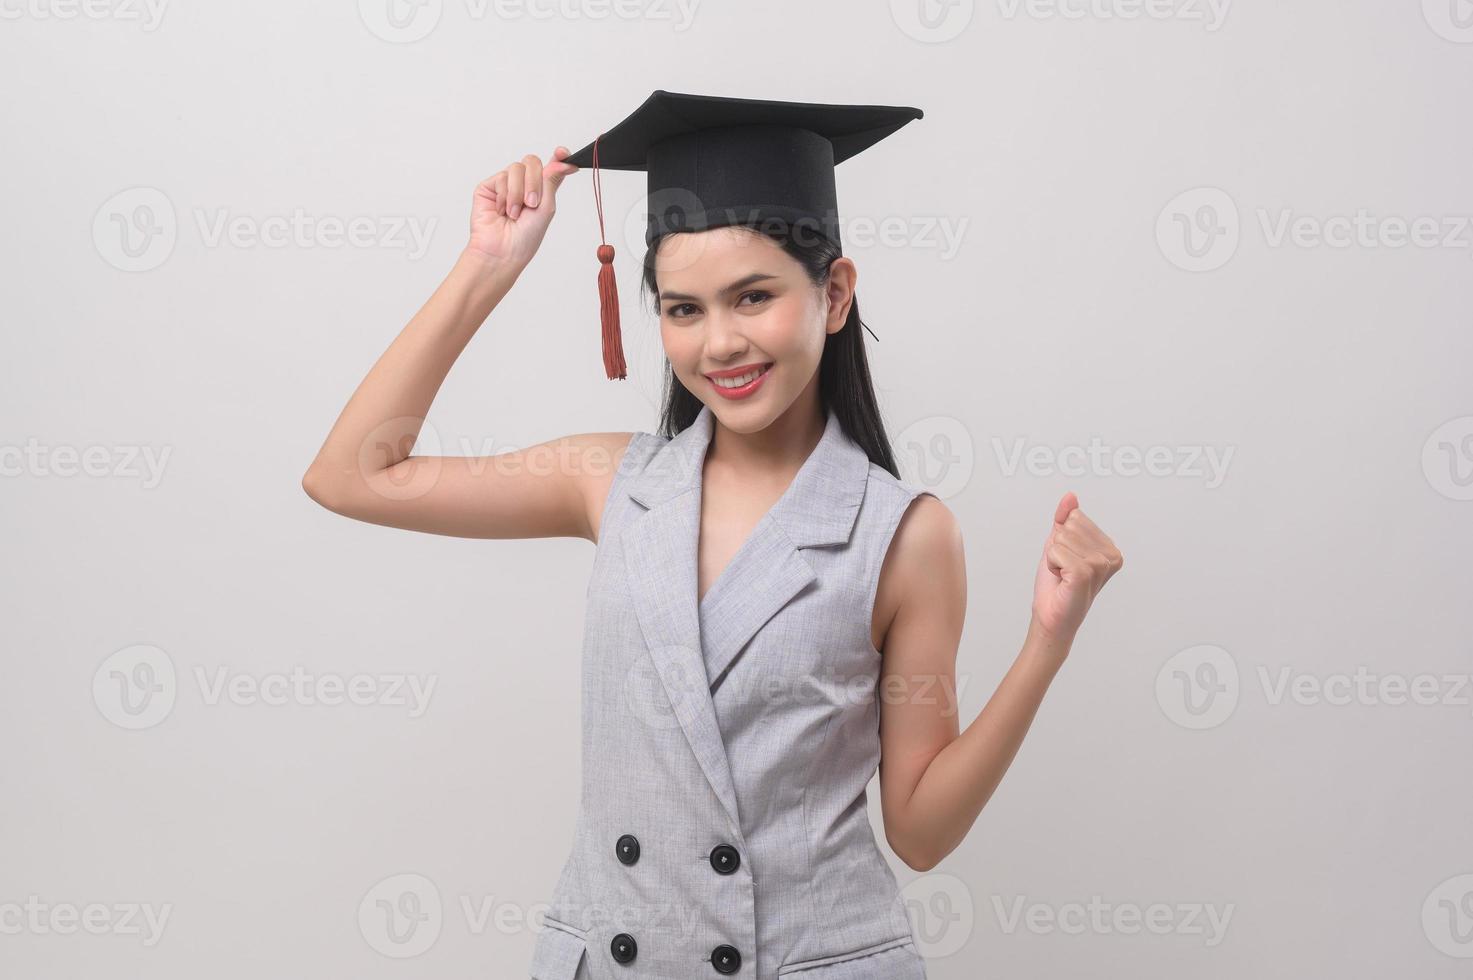 Young smiling woman wearing graduation hat, education and university concept photo